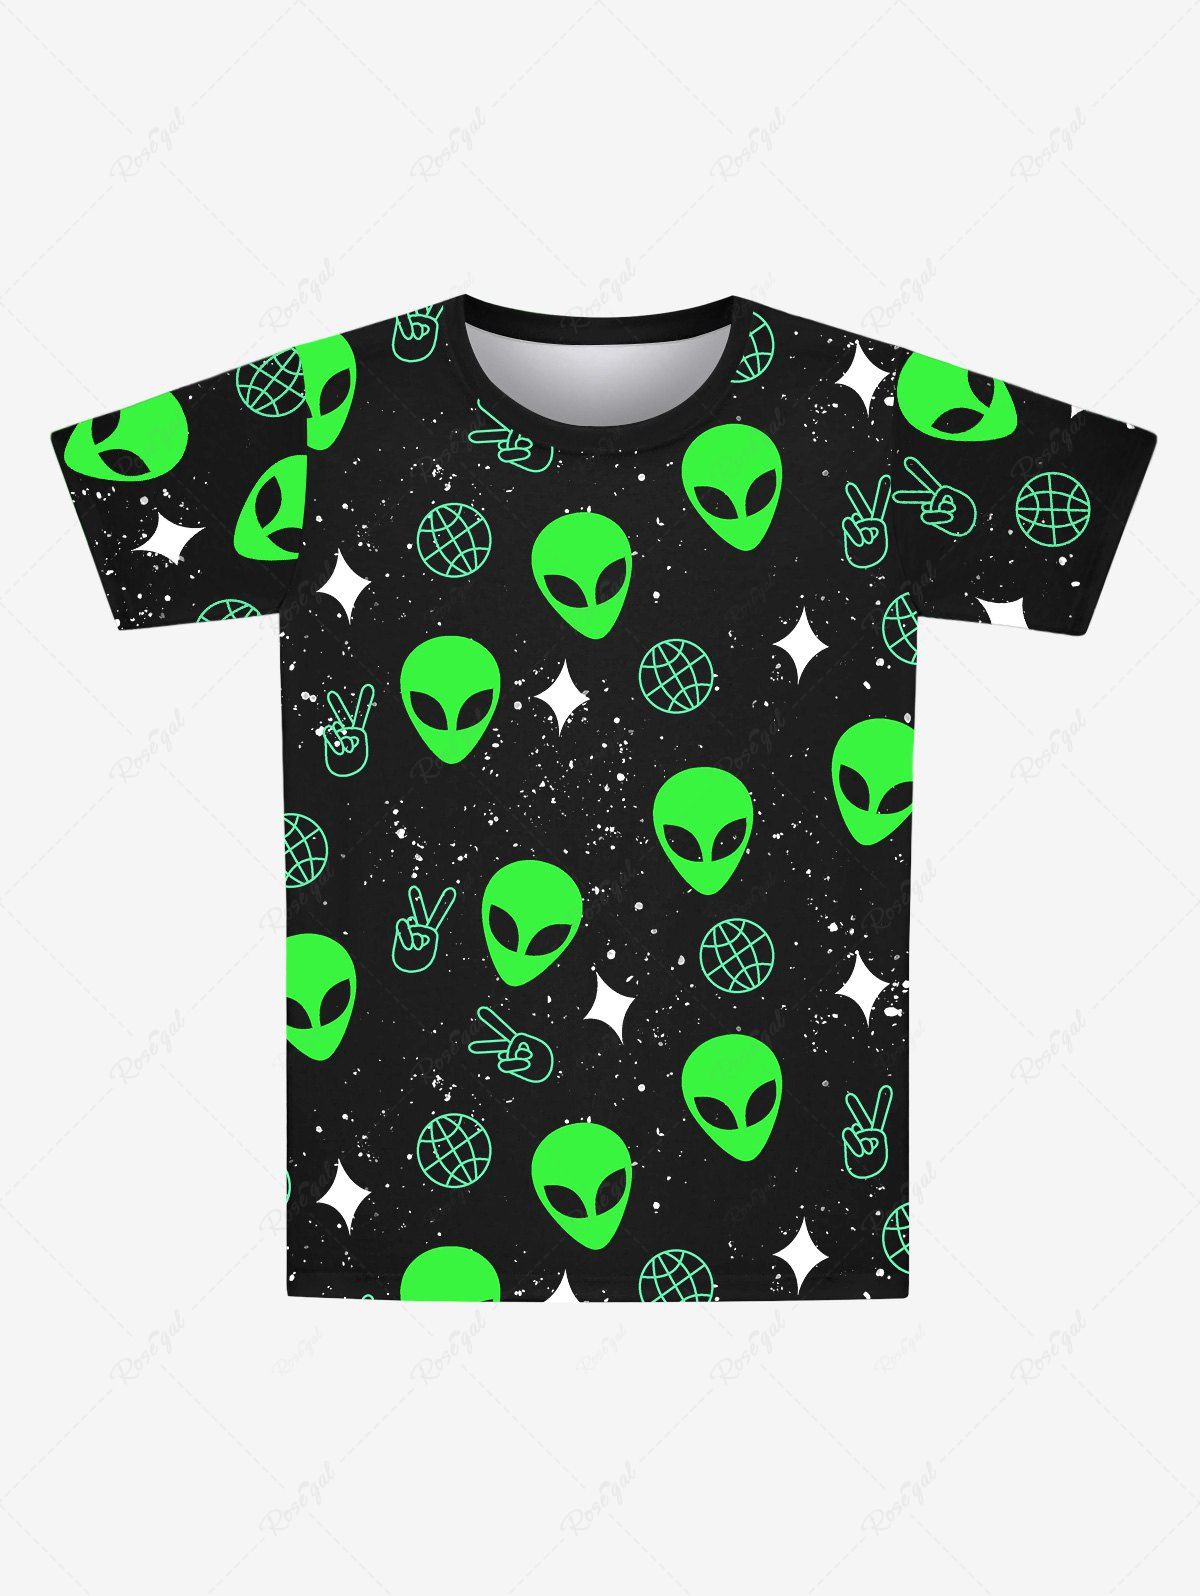 Online Gothic Alien Moon Star Victory Gesture Galaxy Print Short Sleeves T-shirt For Men  